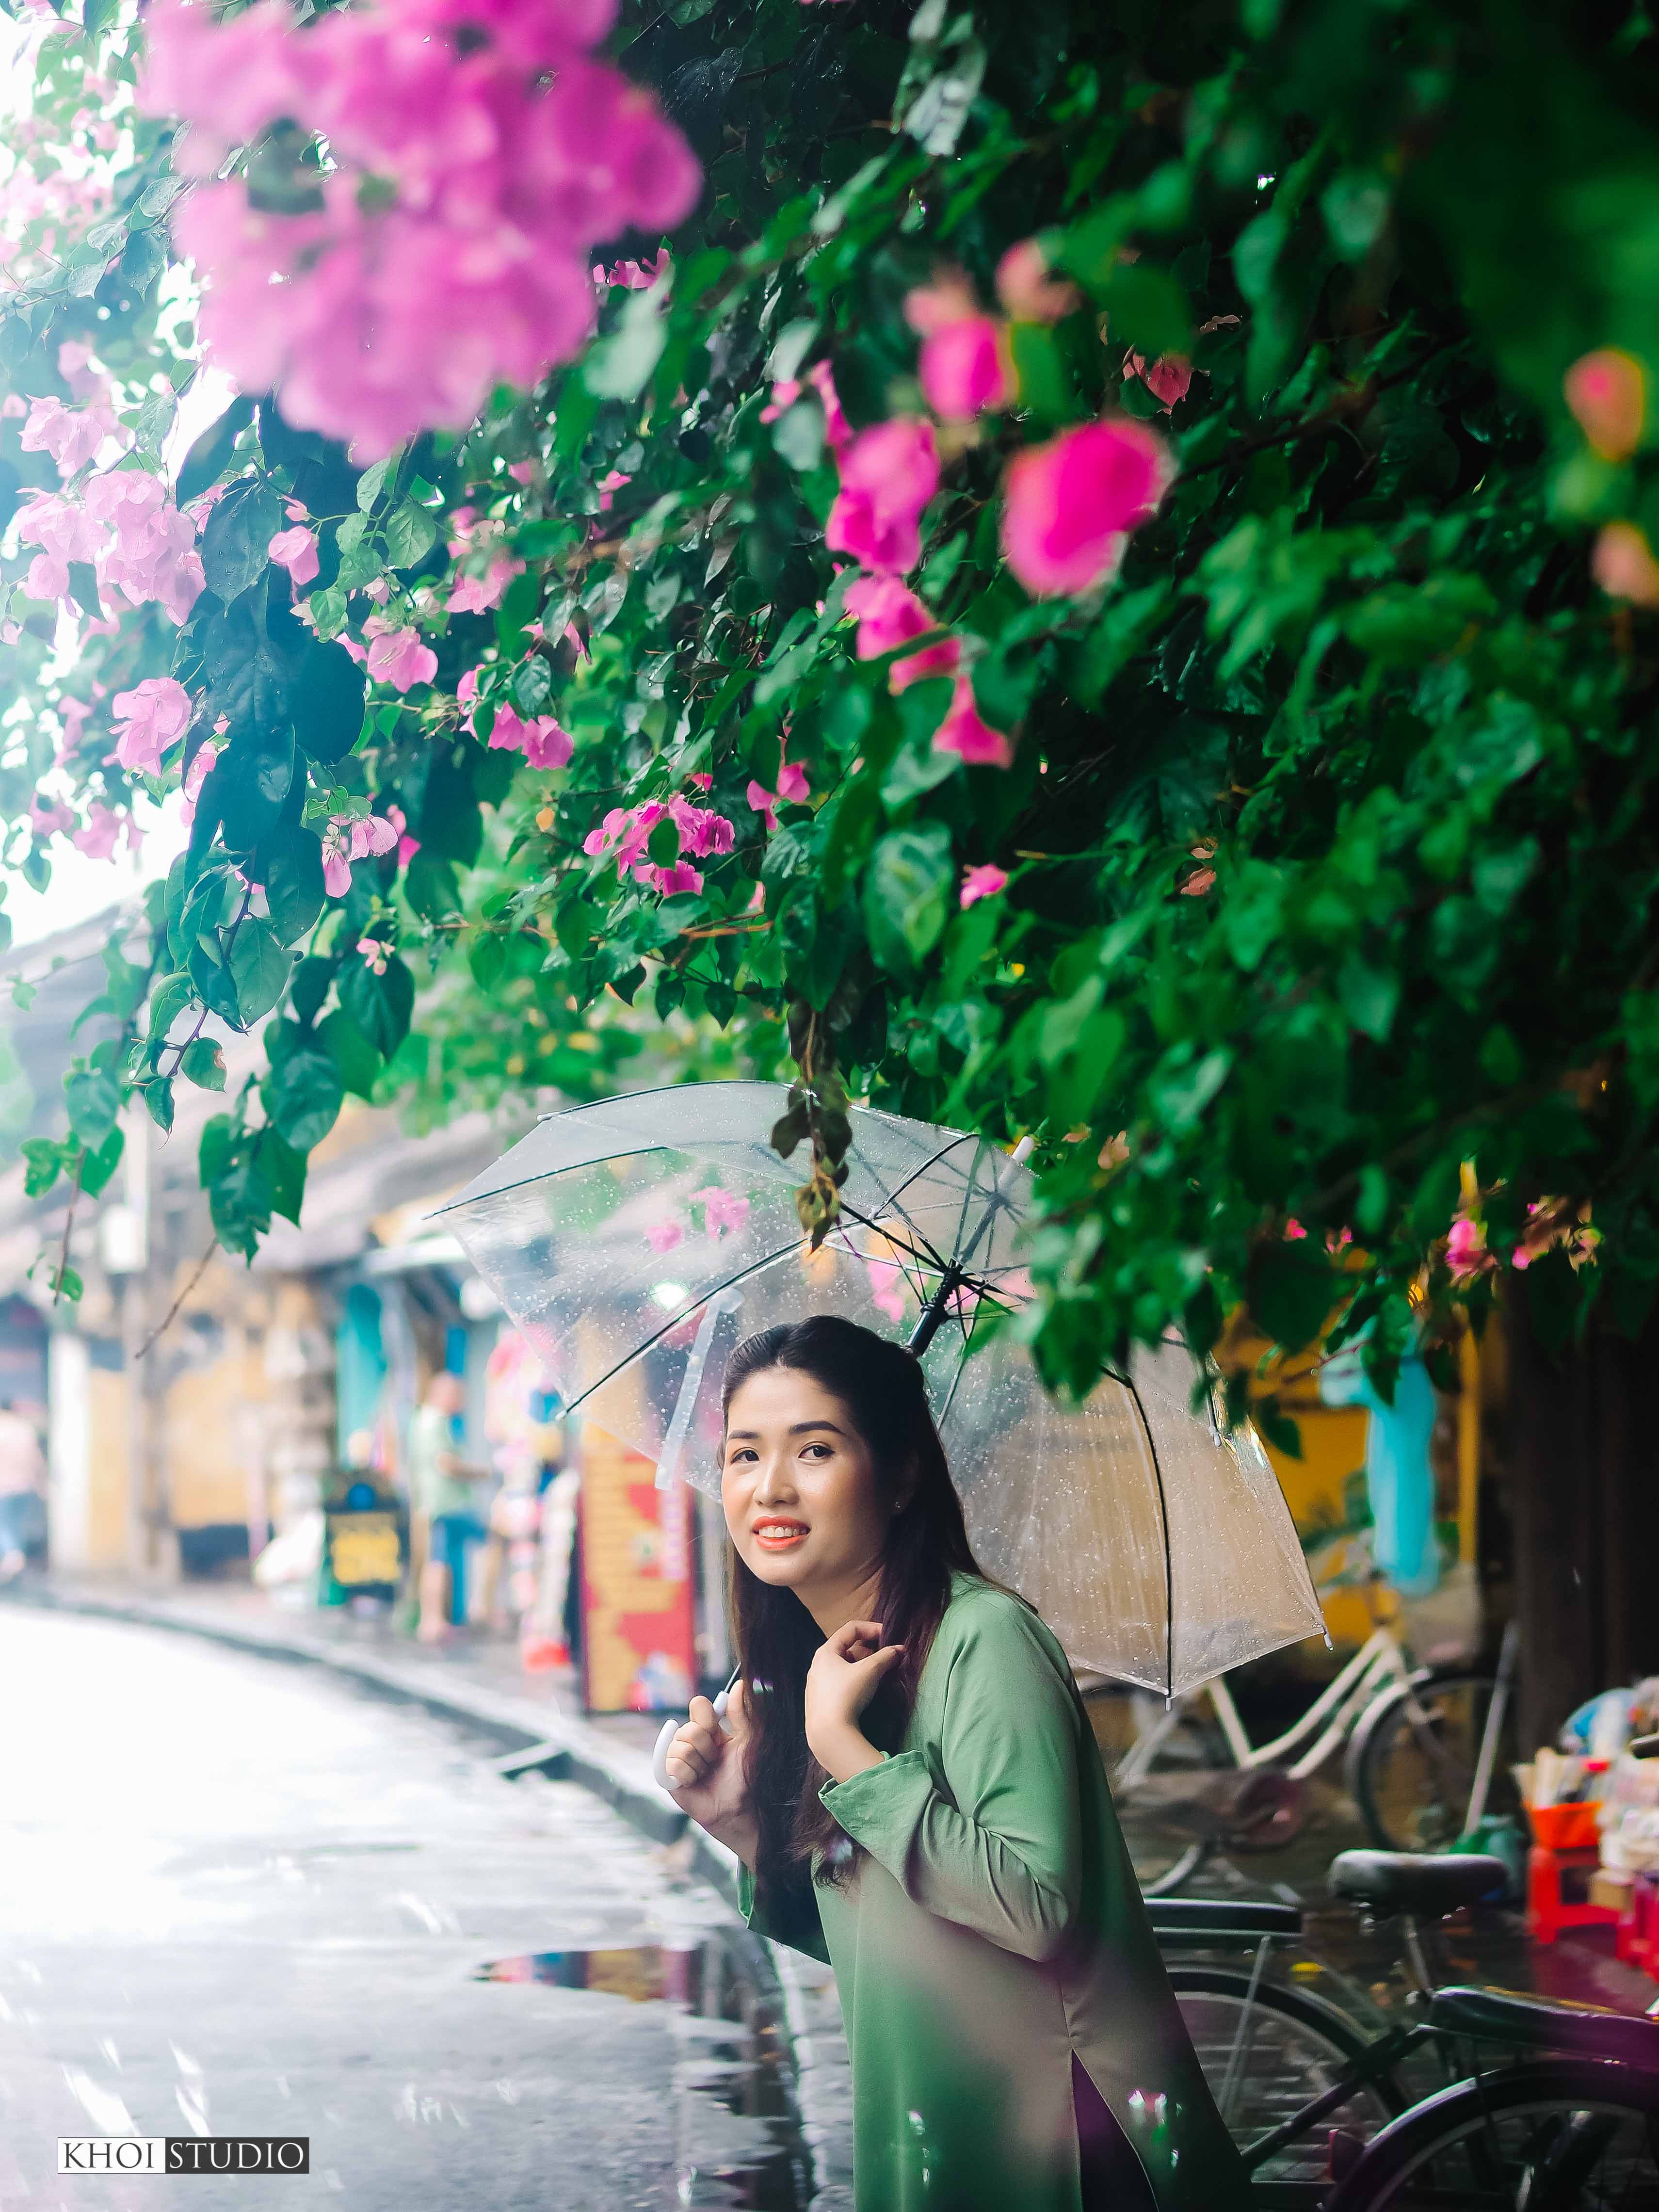 Travel photography with Ao Dai in the rain in Hoi An ancient town: classic, romantic and emotional